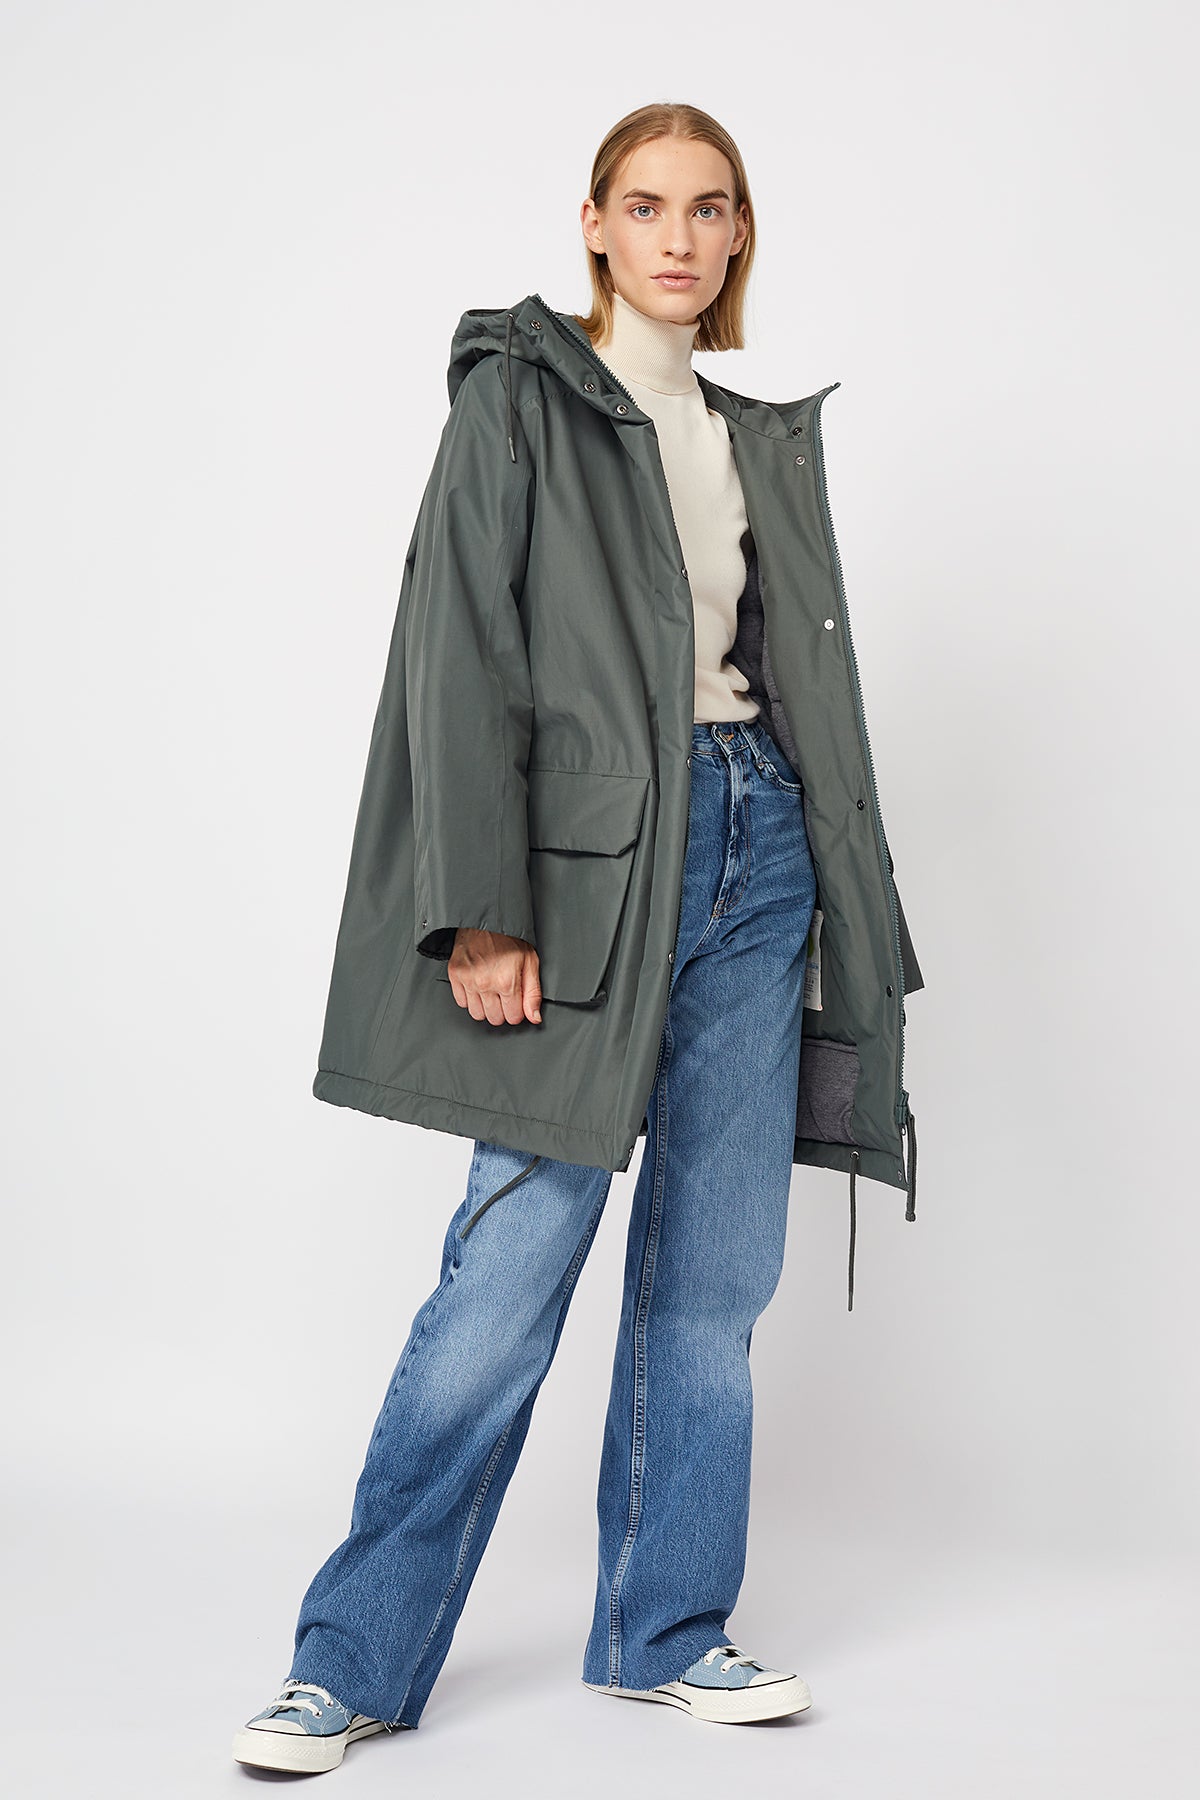 Parka of Kinsey in sustainable the Fir, fair materials made color label fashion from the Jacket LangerChen